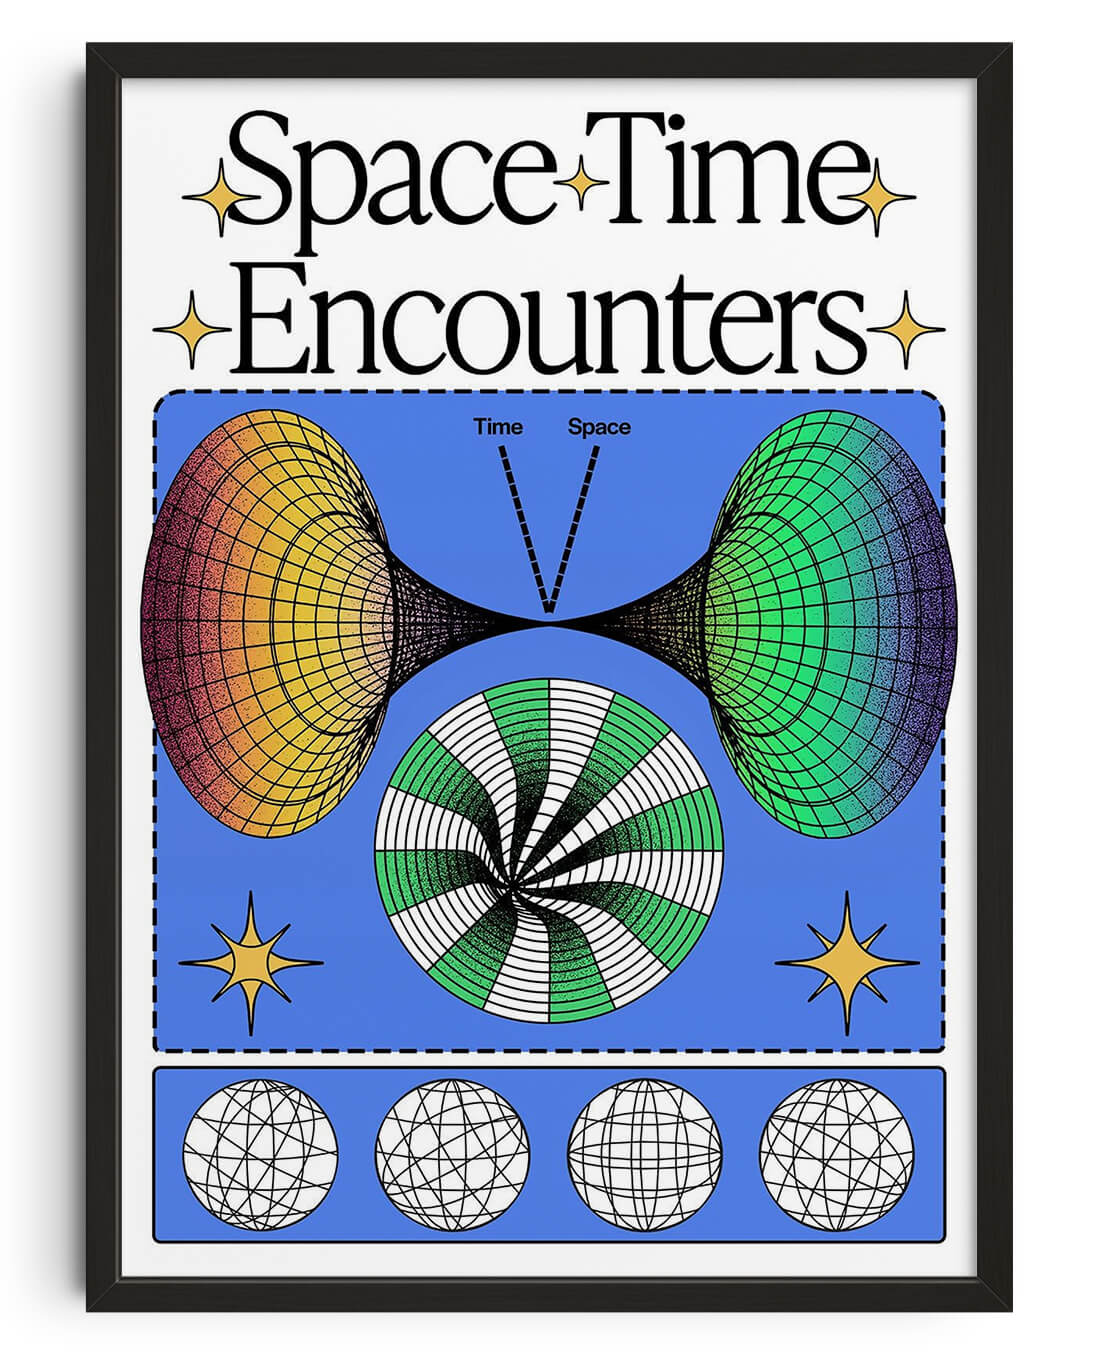 Space Time Encounters by Ricardo Schultz Ferraro contemporary wall art print from DROOL